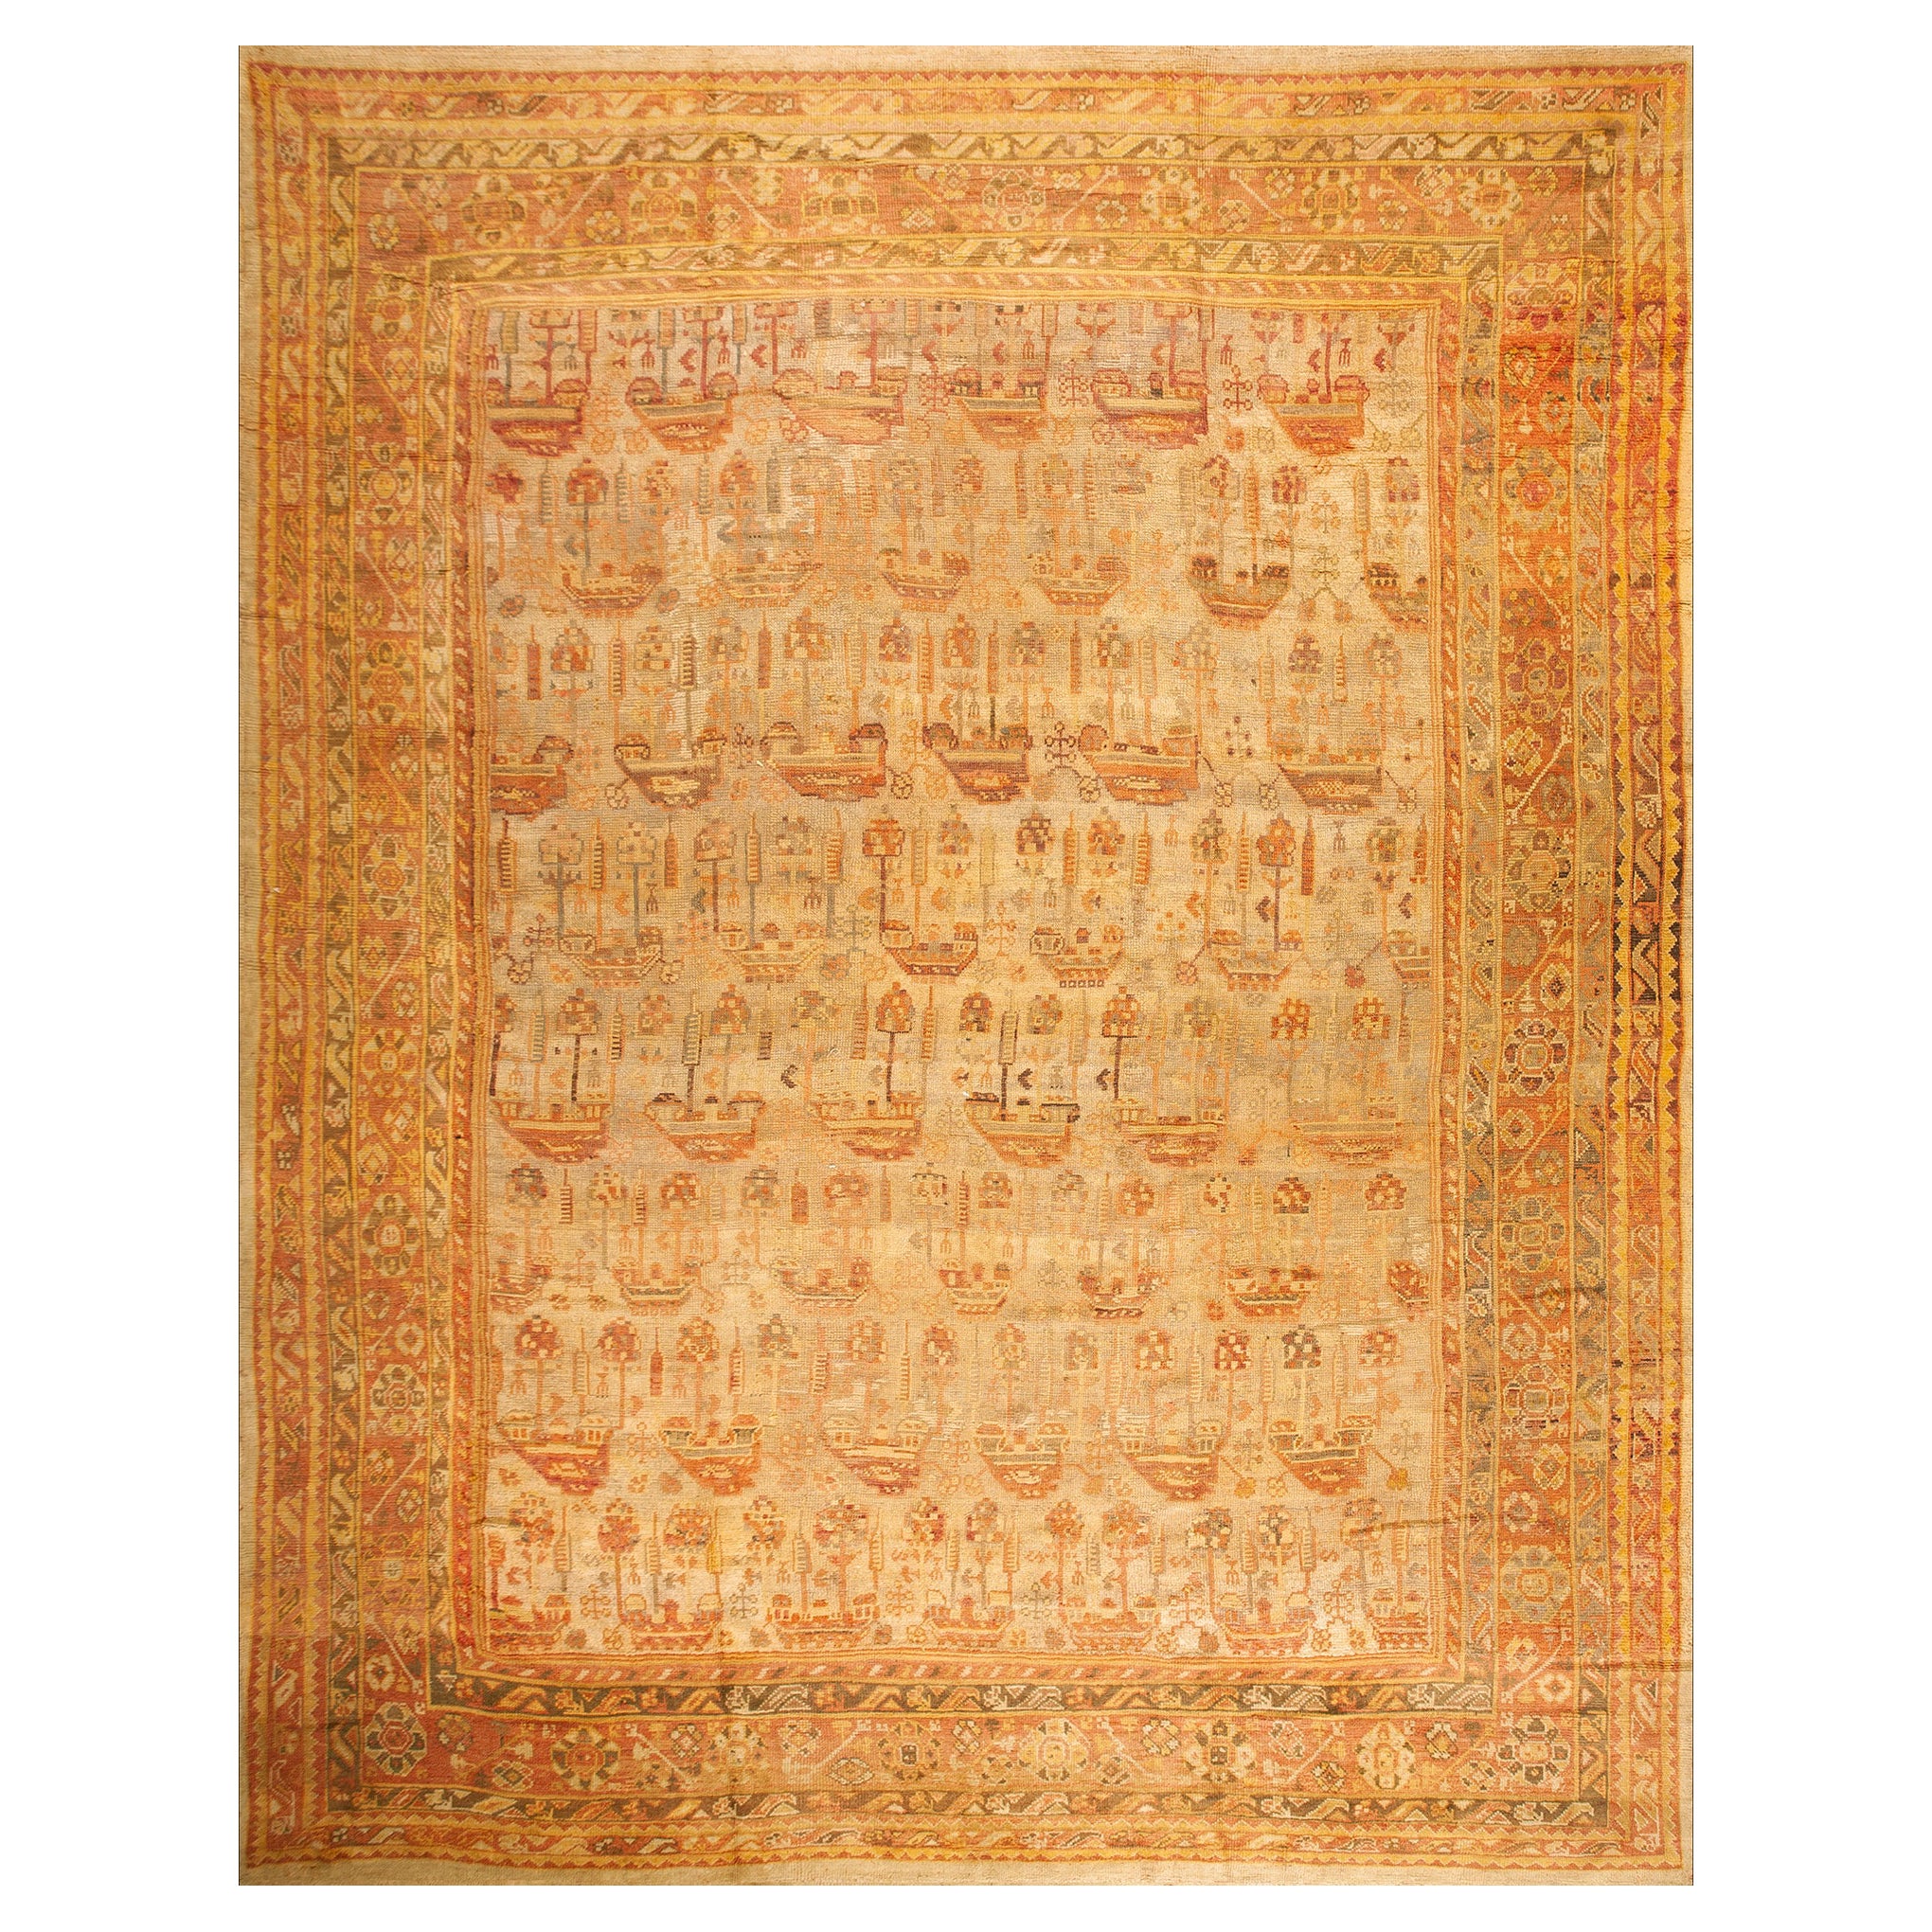 Early 20th Century Turkish Oushak Carpet ( 12'3" x 15'10" - 375 x 485 cm )  For Sale